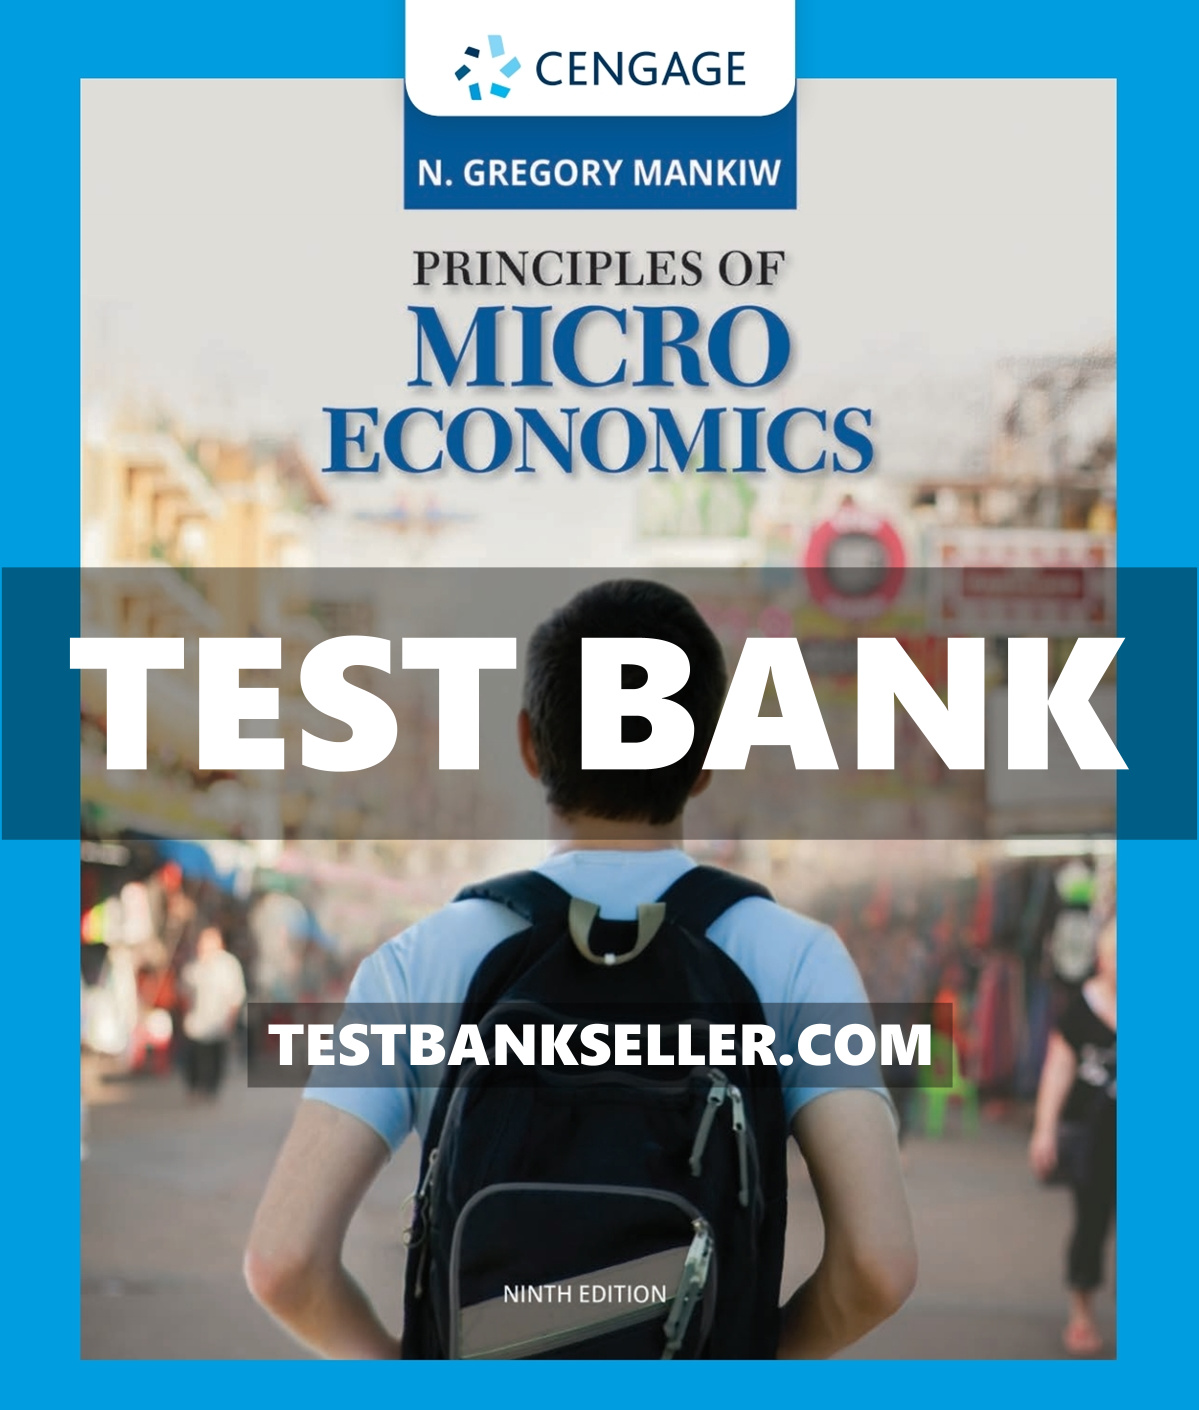 Test Bank For Macroeconomics, 10th Edition N. Gregory Mankiw